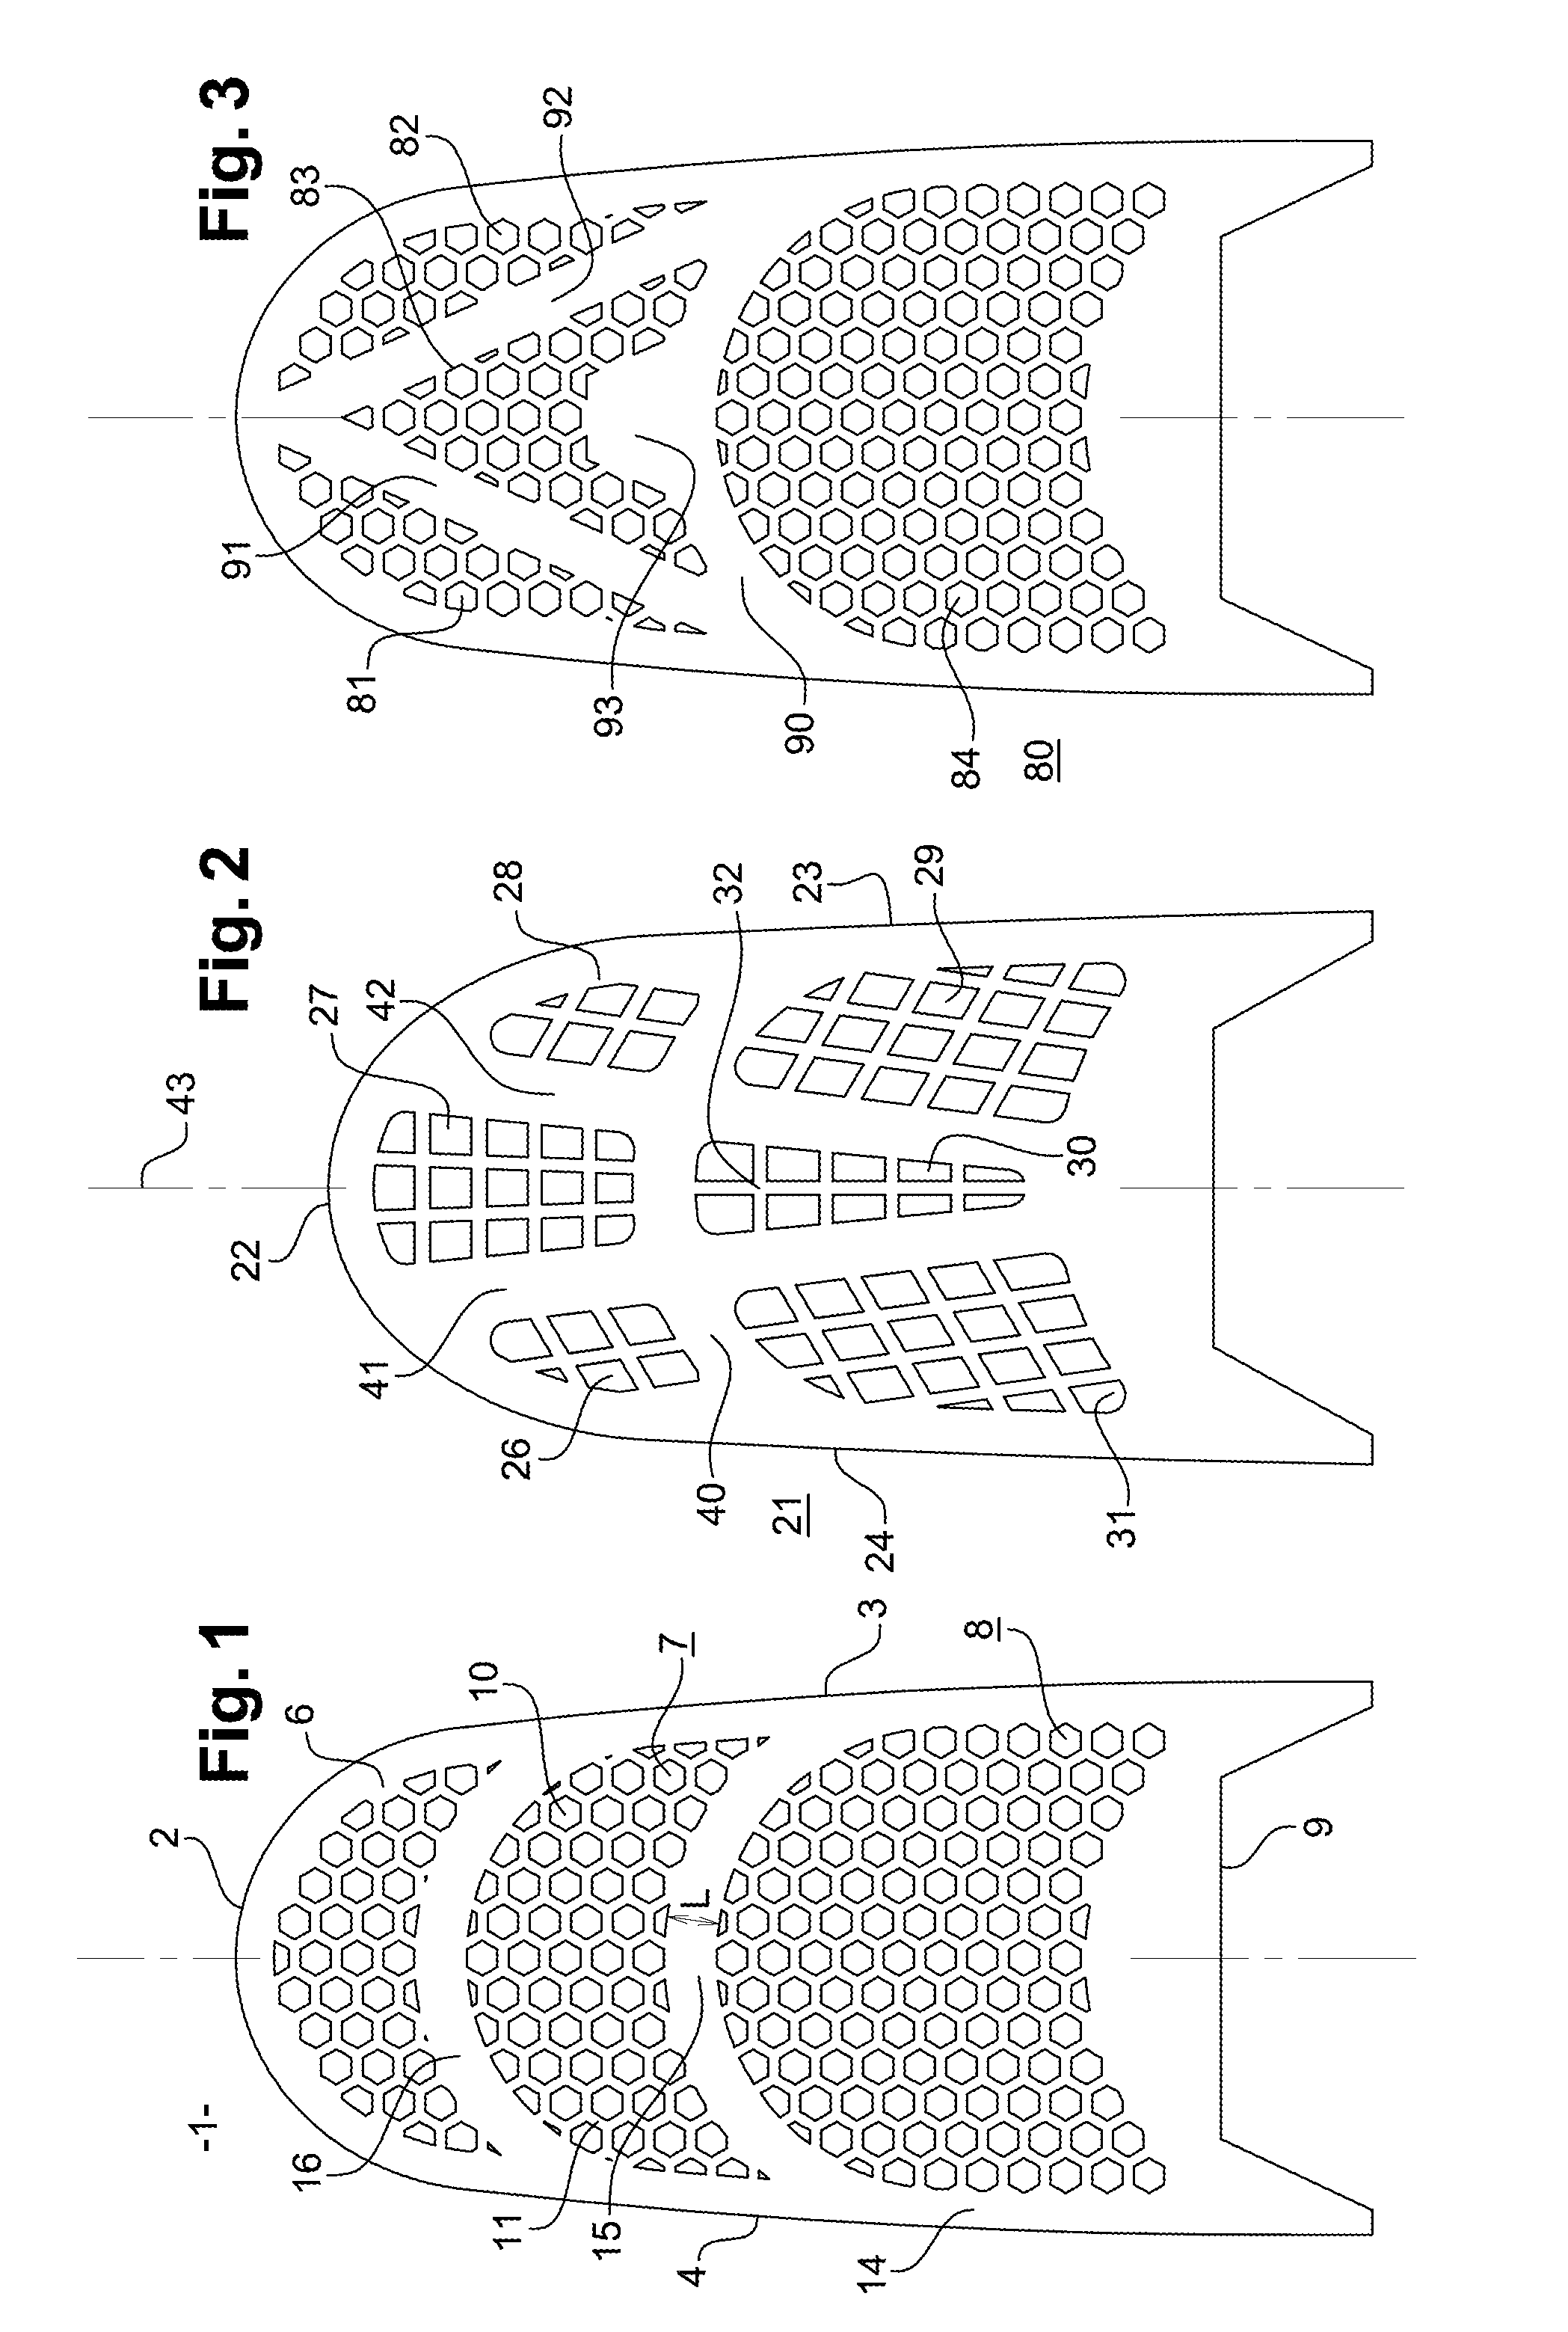 Snow gliding board structure element, and gliding board incorporating such an element